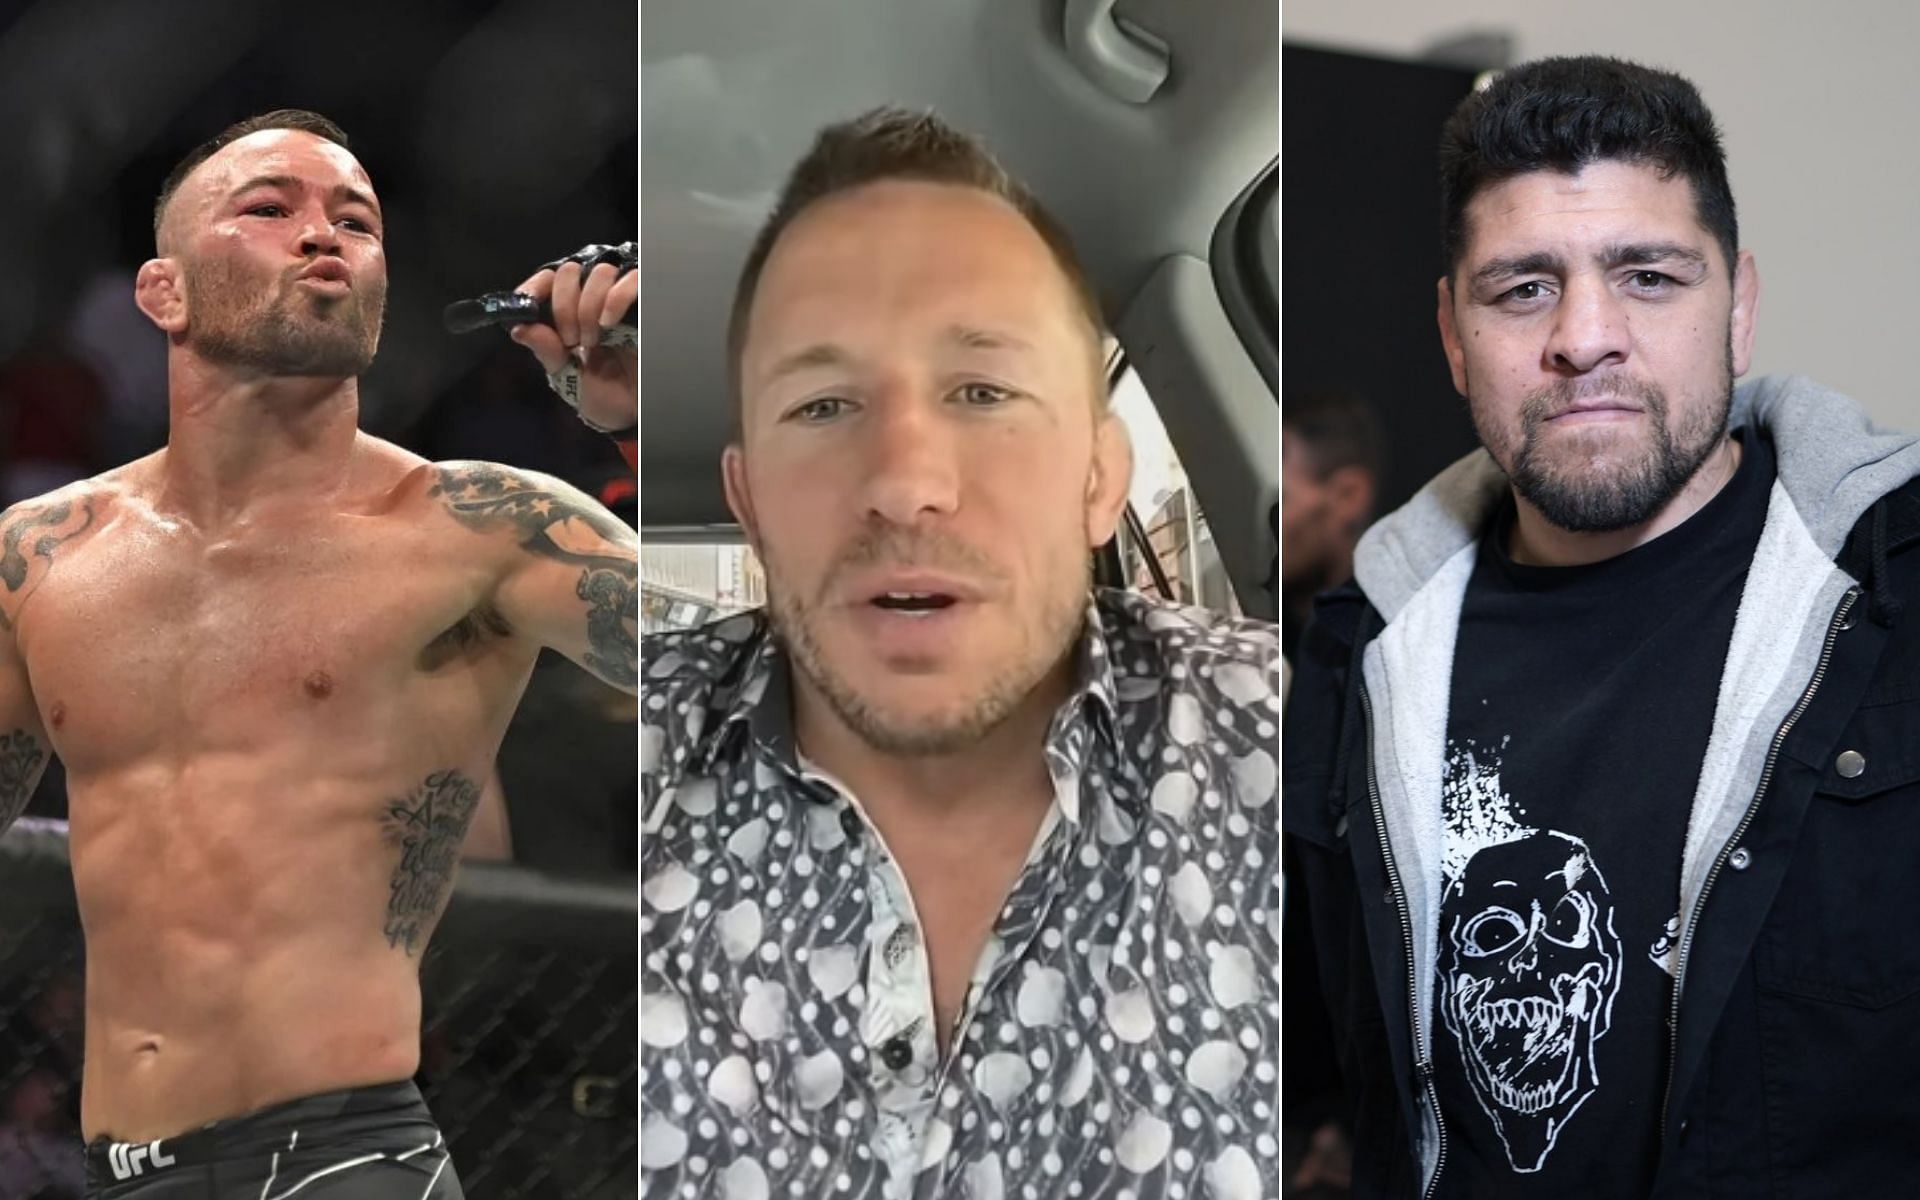 Colby Covington [Left], Georges St-Pierre [Middle], and Nick Diaz [Right] [Photo credit: MMAFightingonSBN - YouTube and @ufc - Twitter]